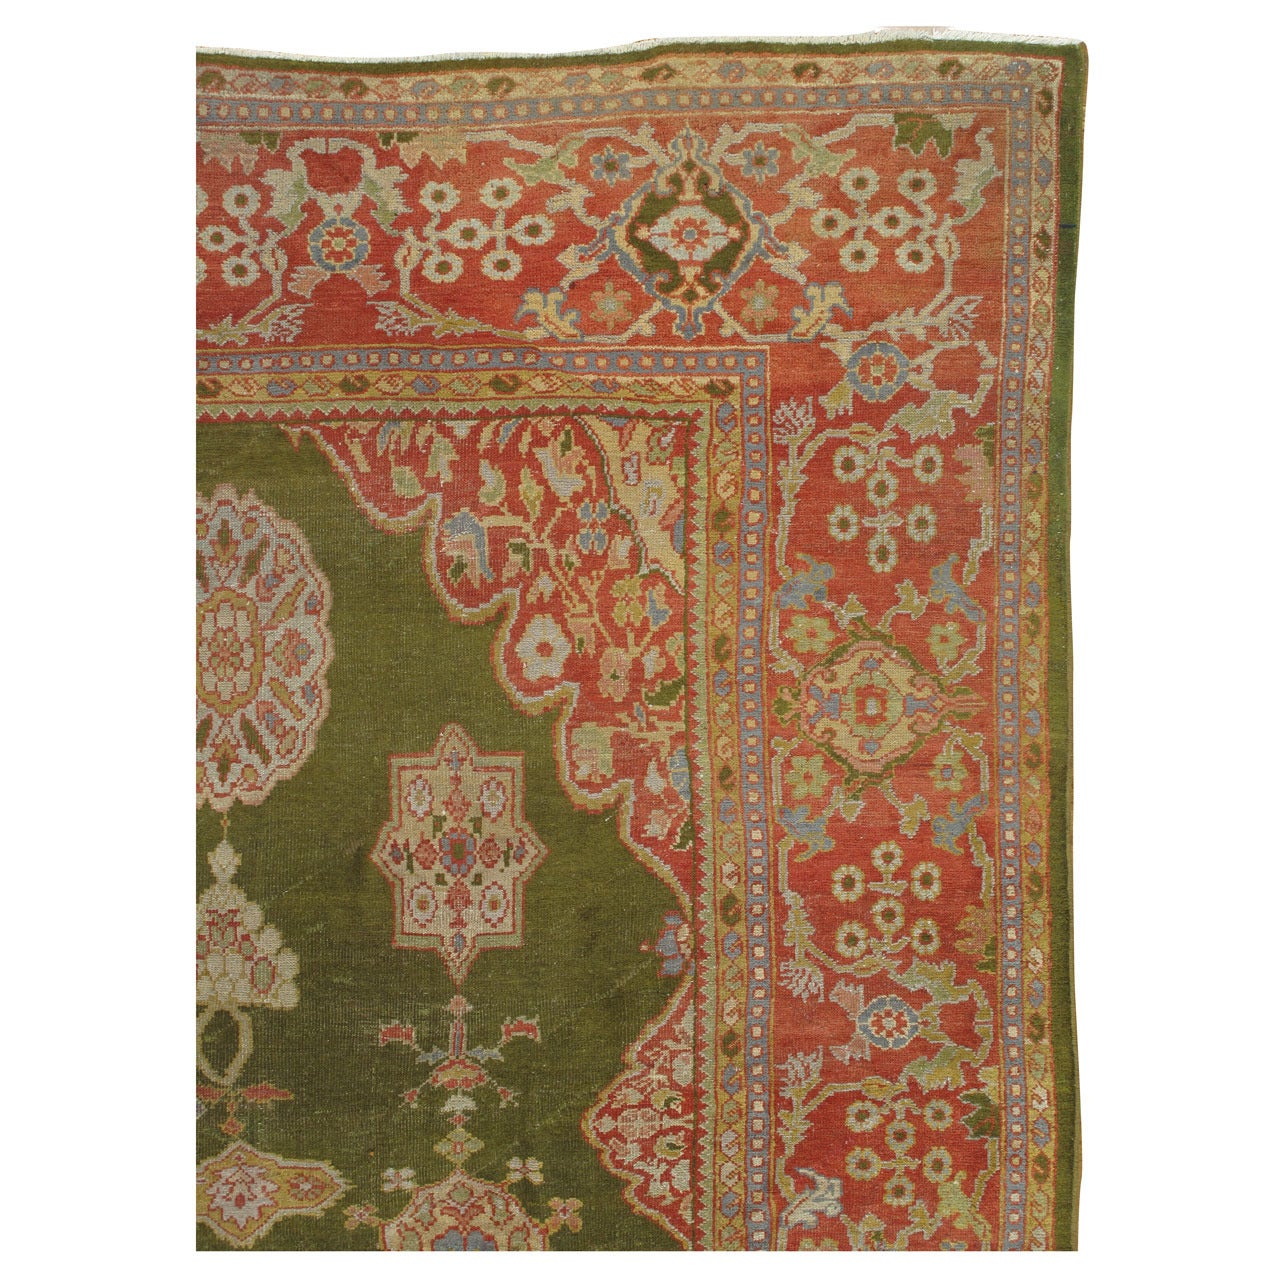 Antique Persian Sultanabad Carpet Green, Coral-Red, Light Blue, Gold and Ivory For Sale